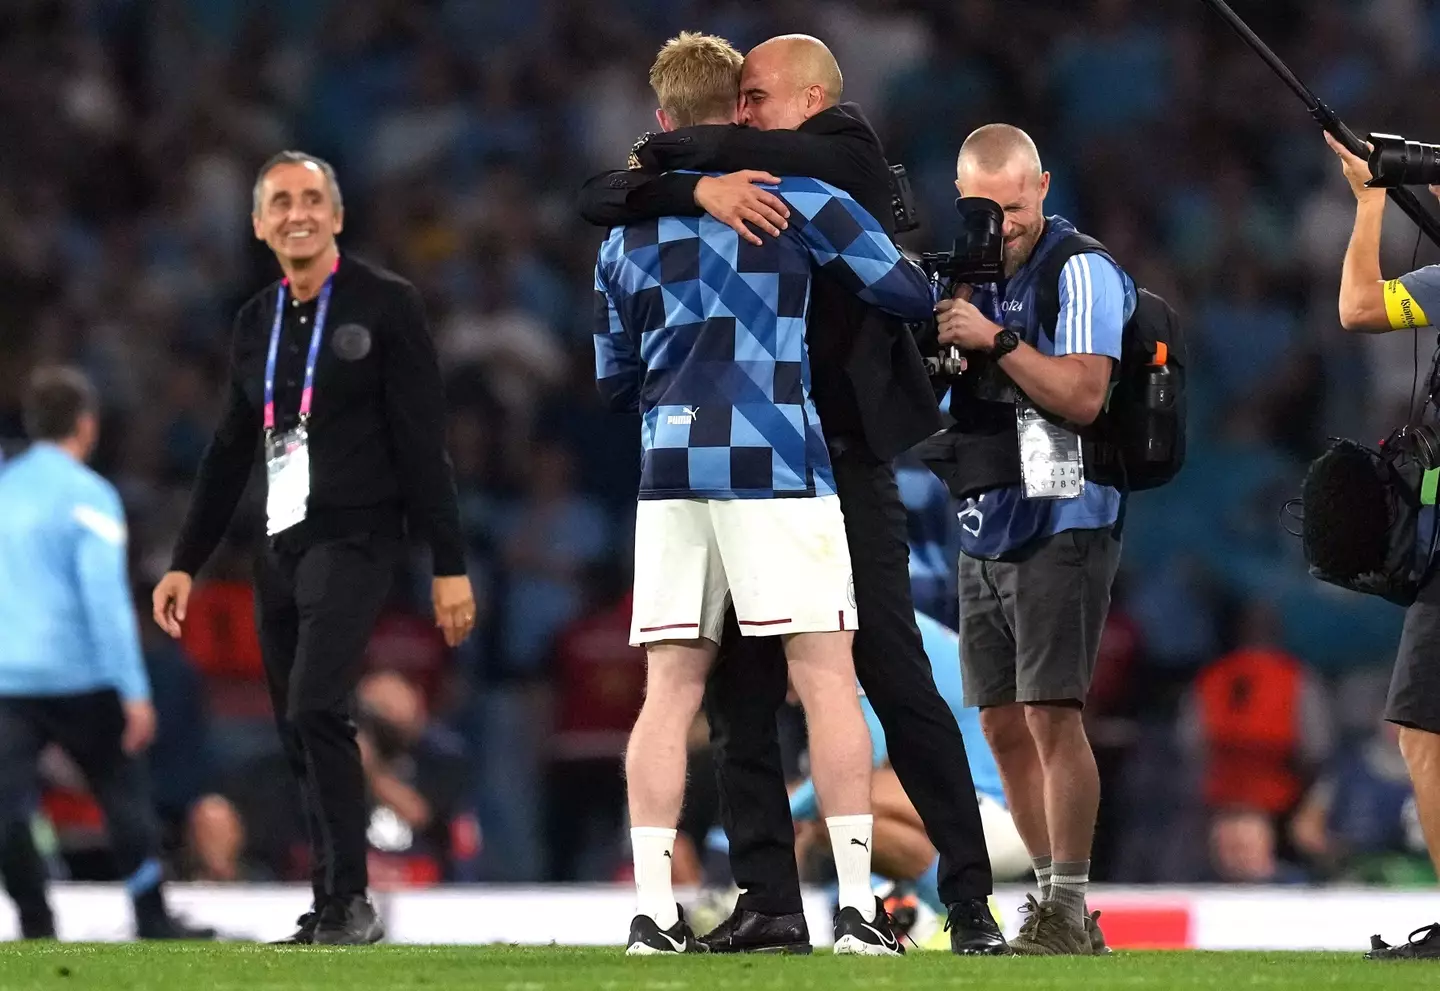 Pep Guardiola celebrates with Kevin De Bruyne after Manchester City win the Champions League. Image: Alamy